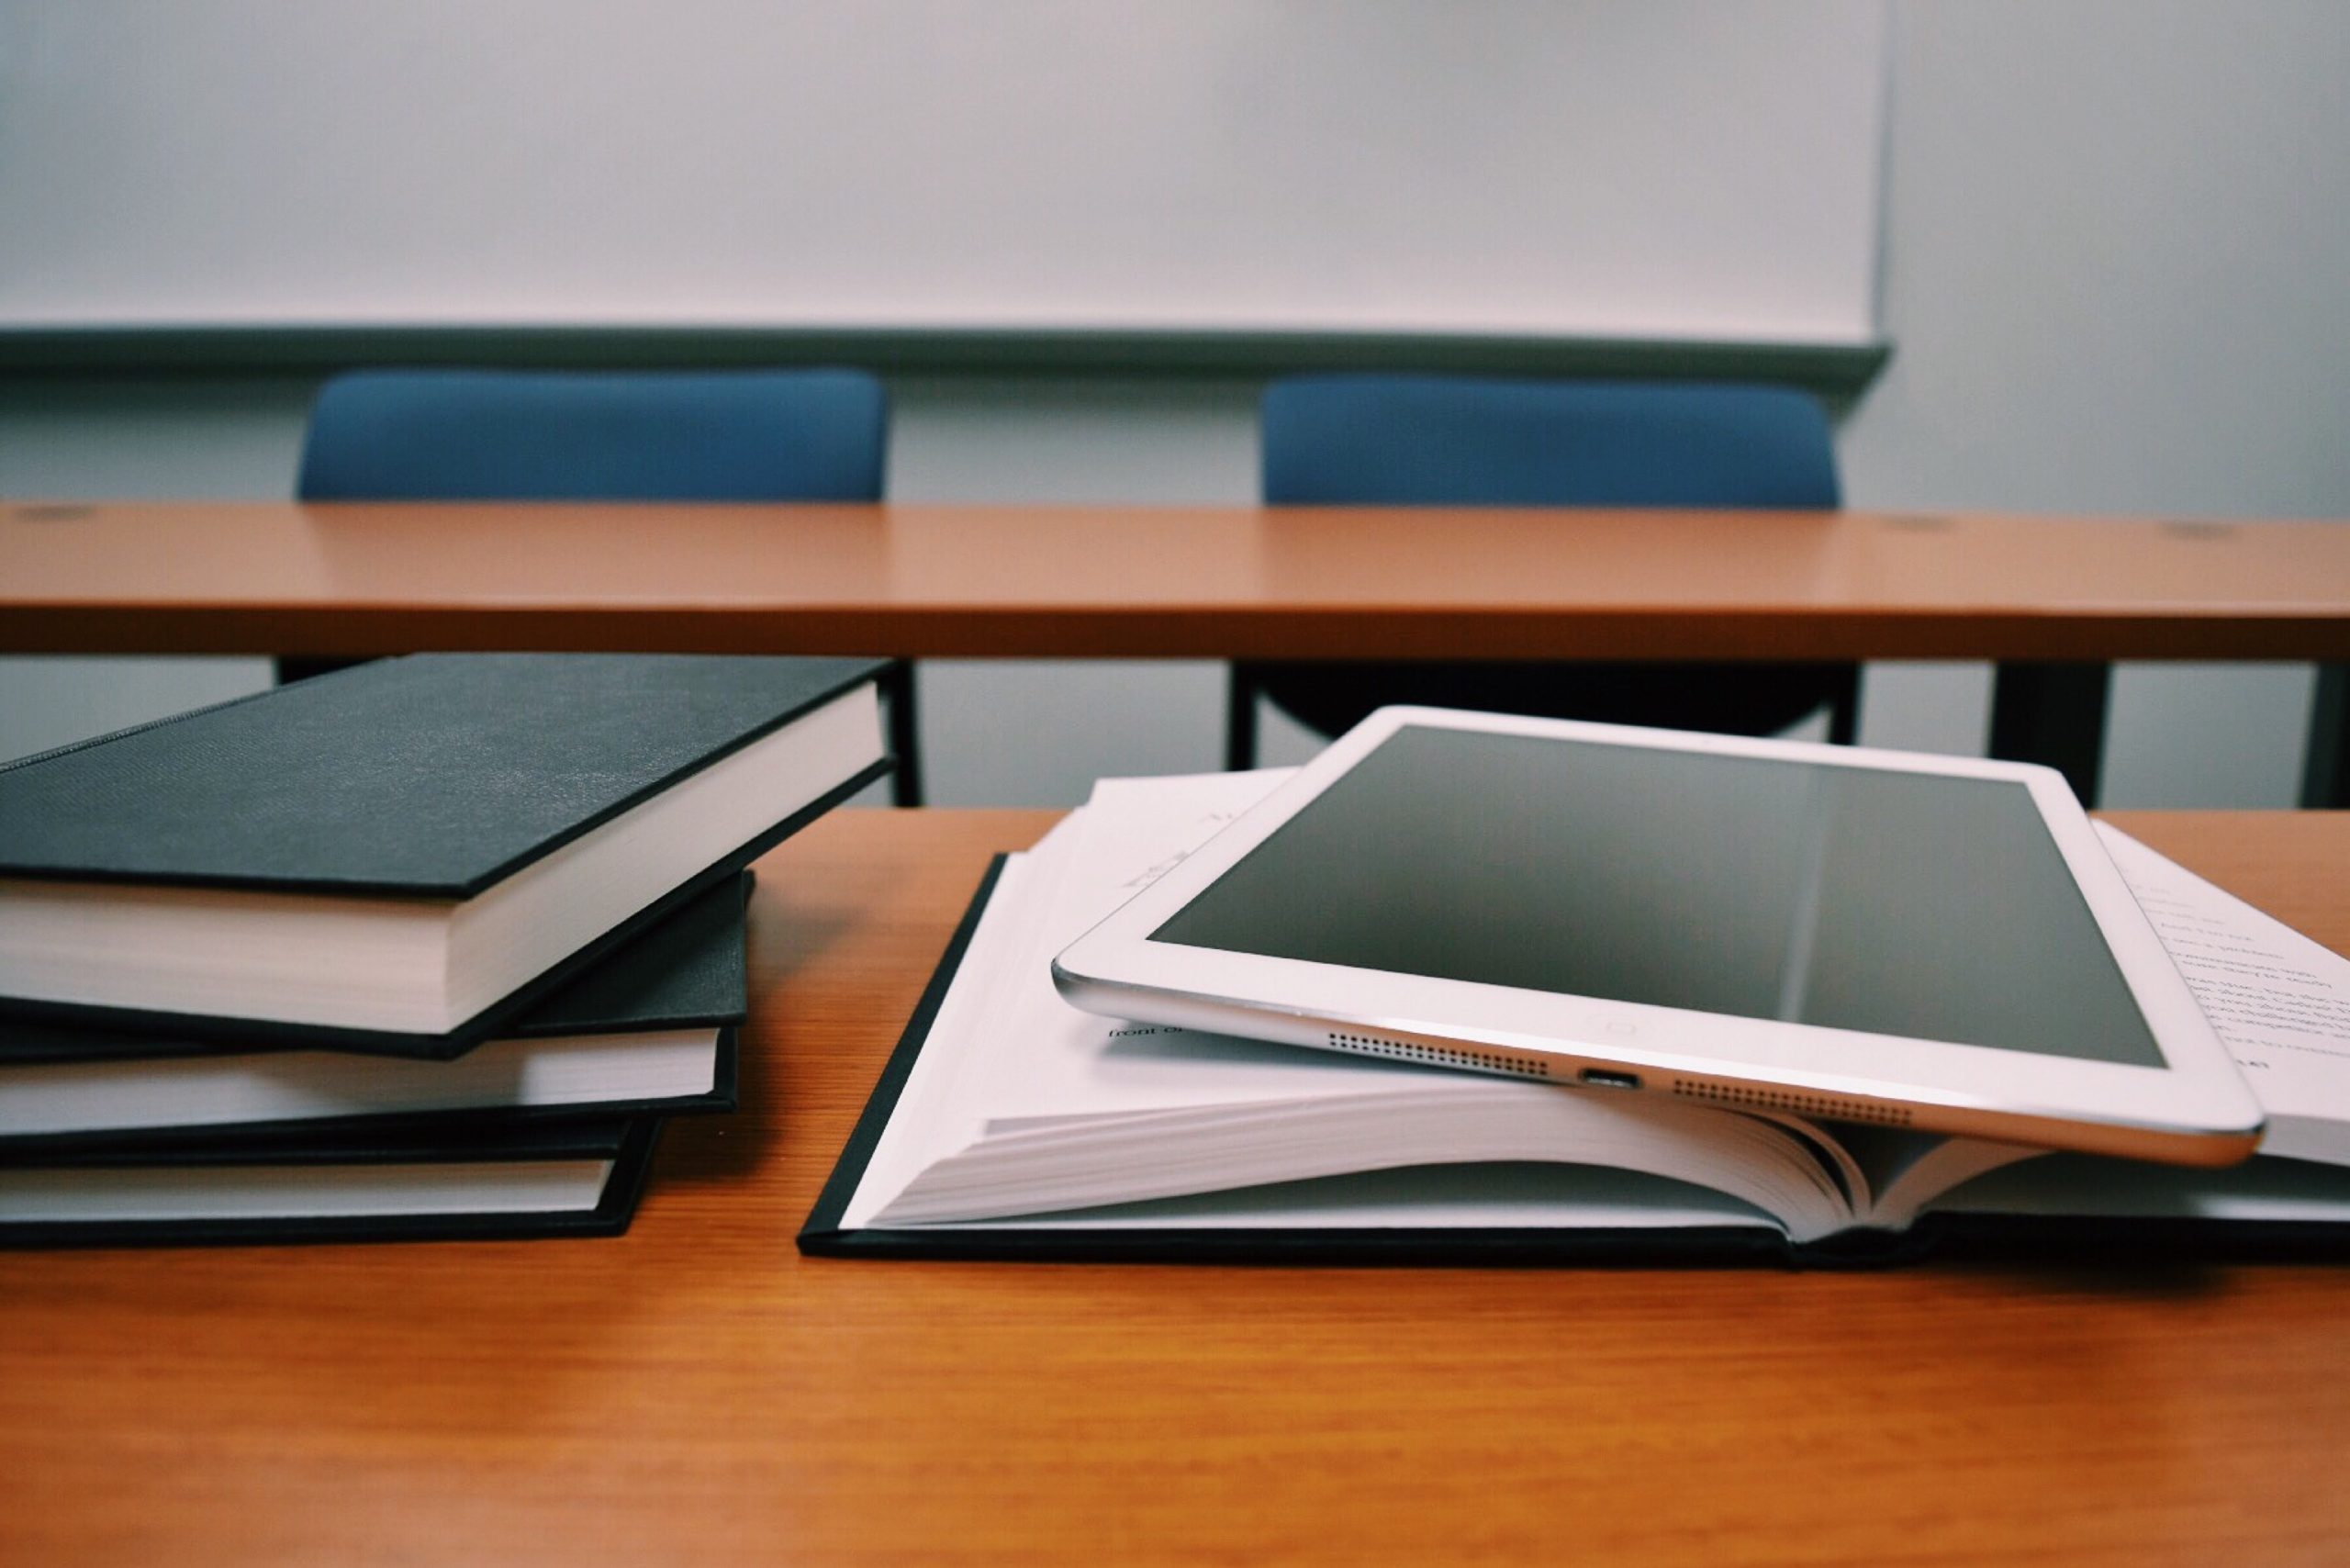 A photo of a stack of books on a classroom table with a tablet on top